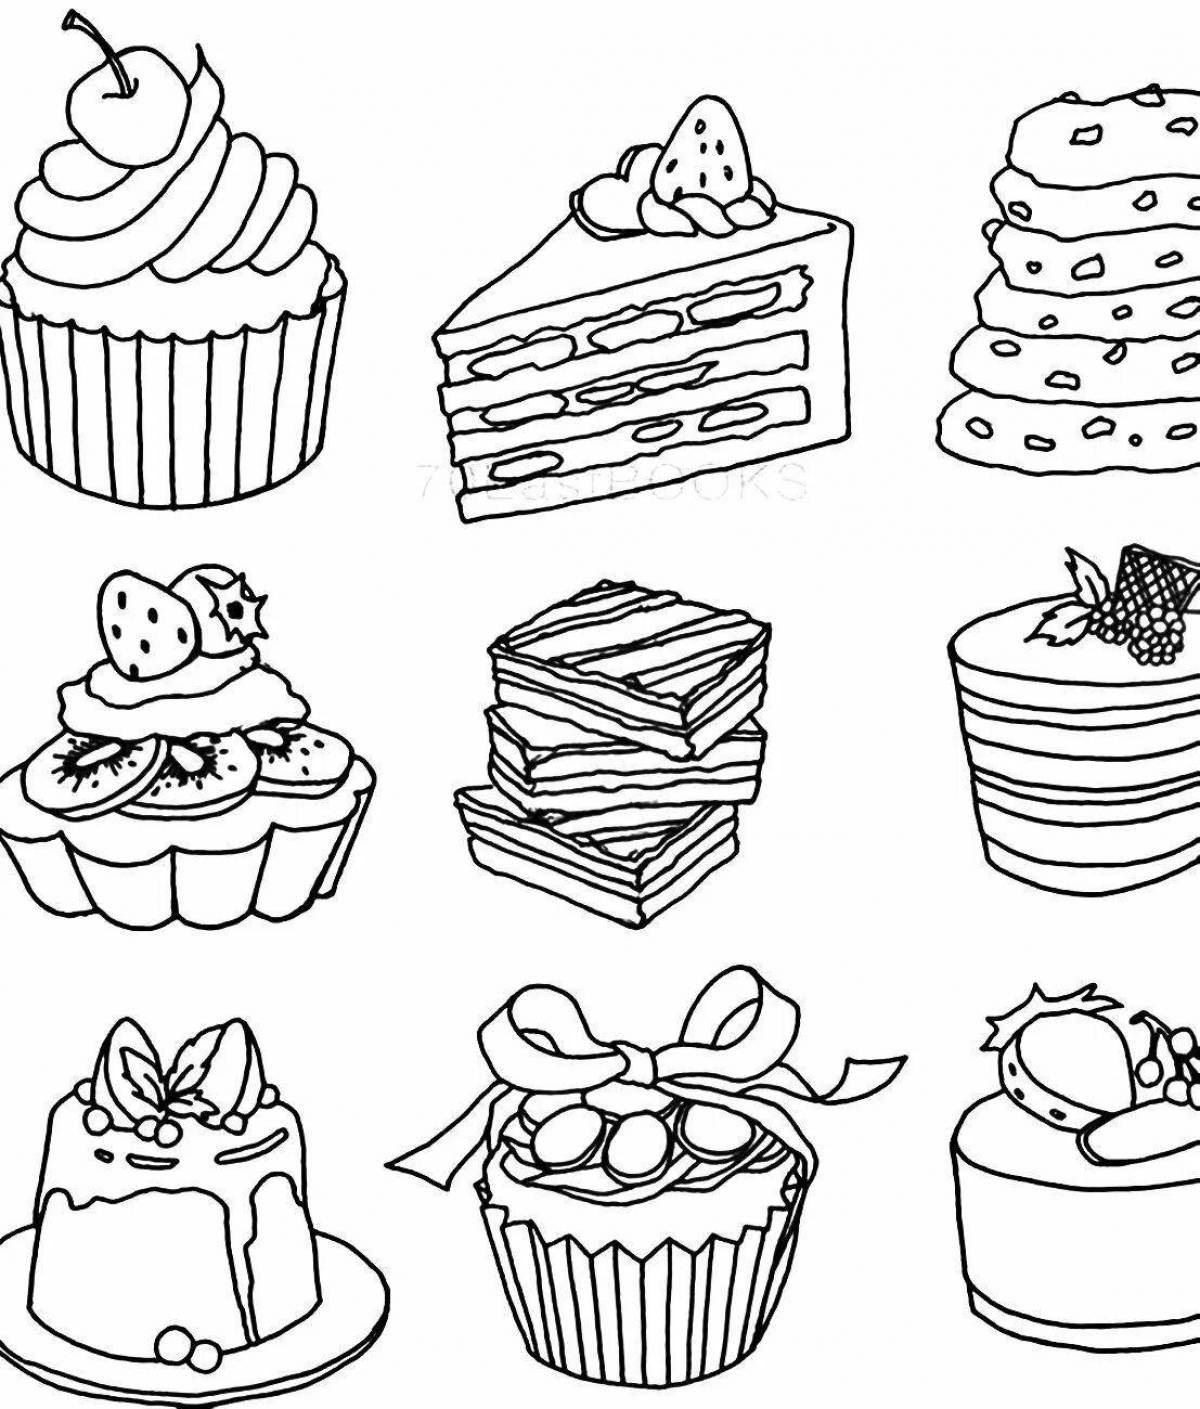 Spicy cake coloring book